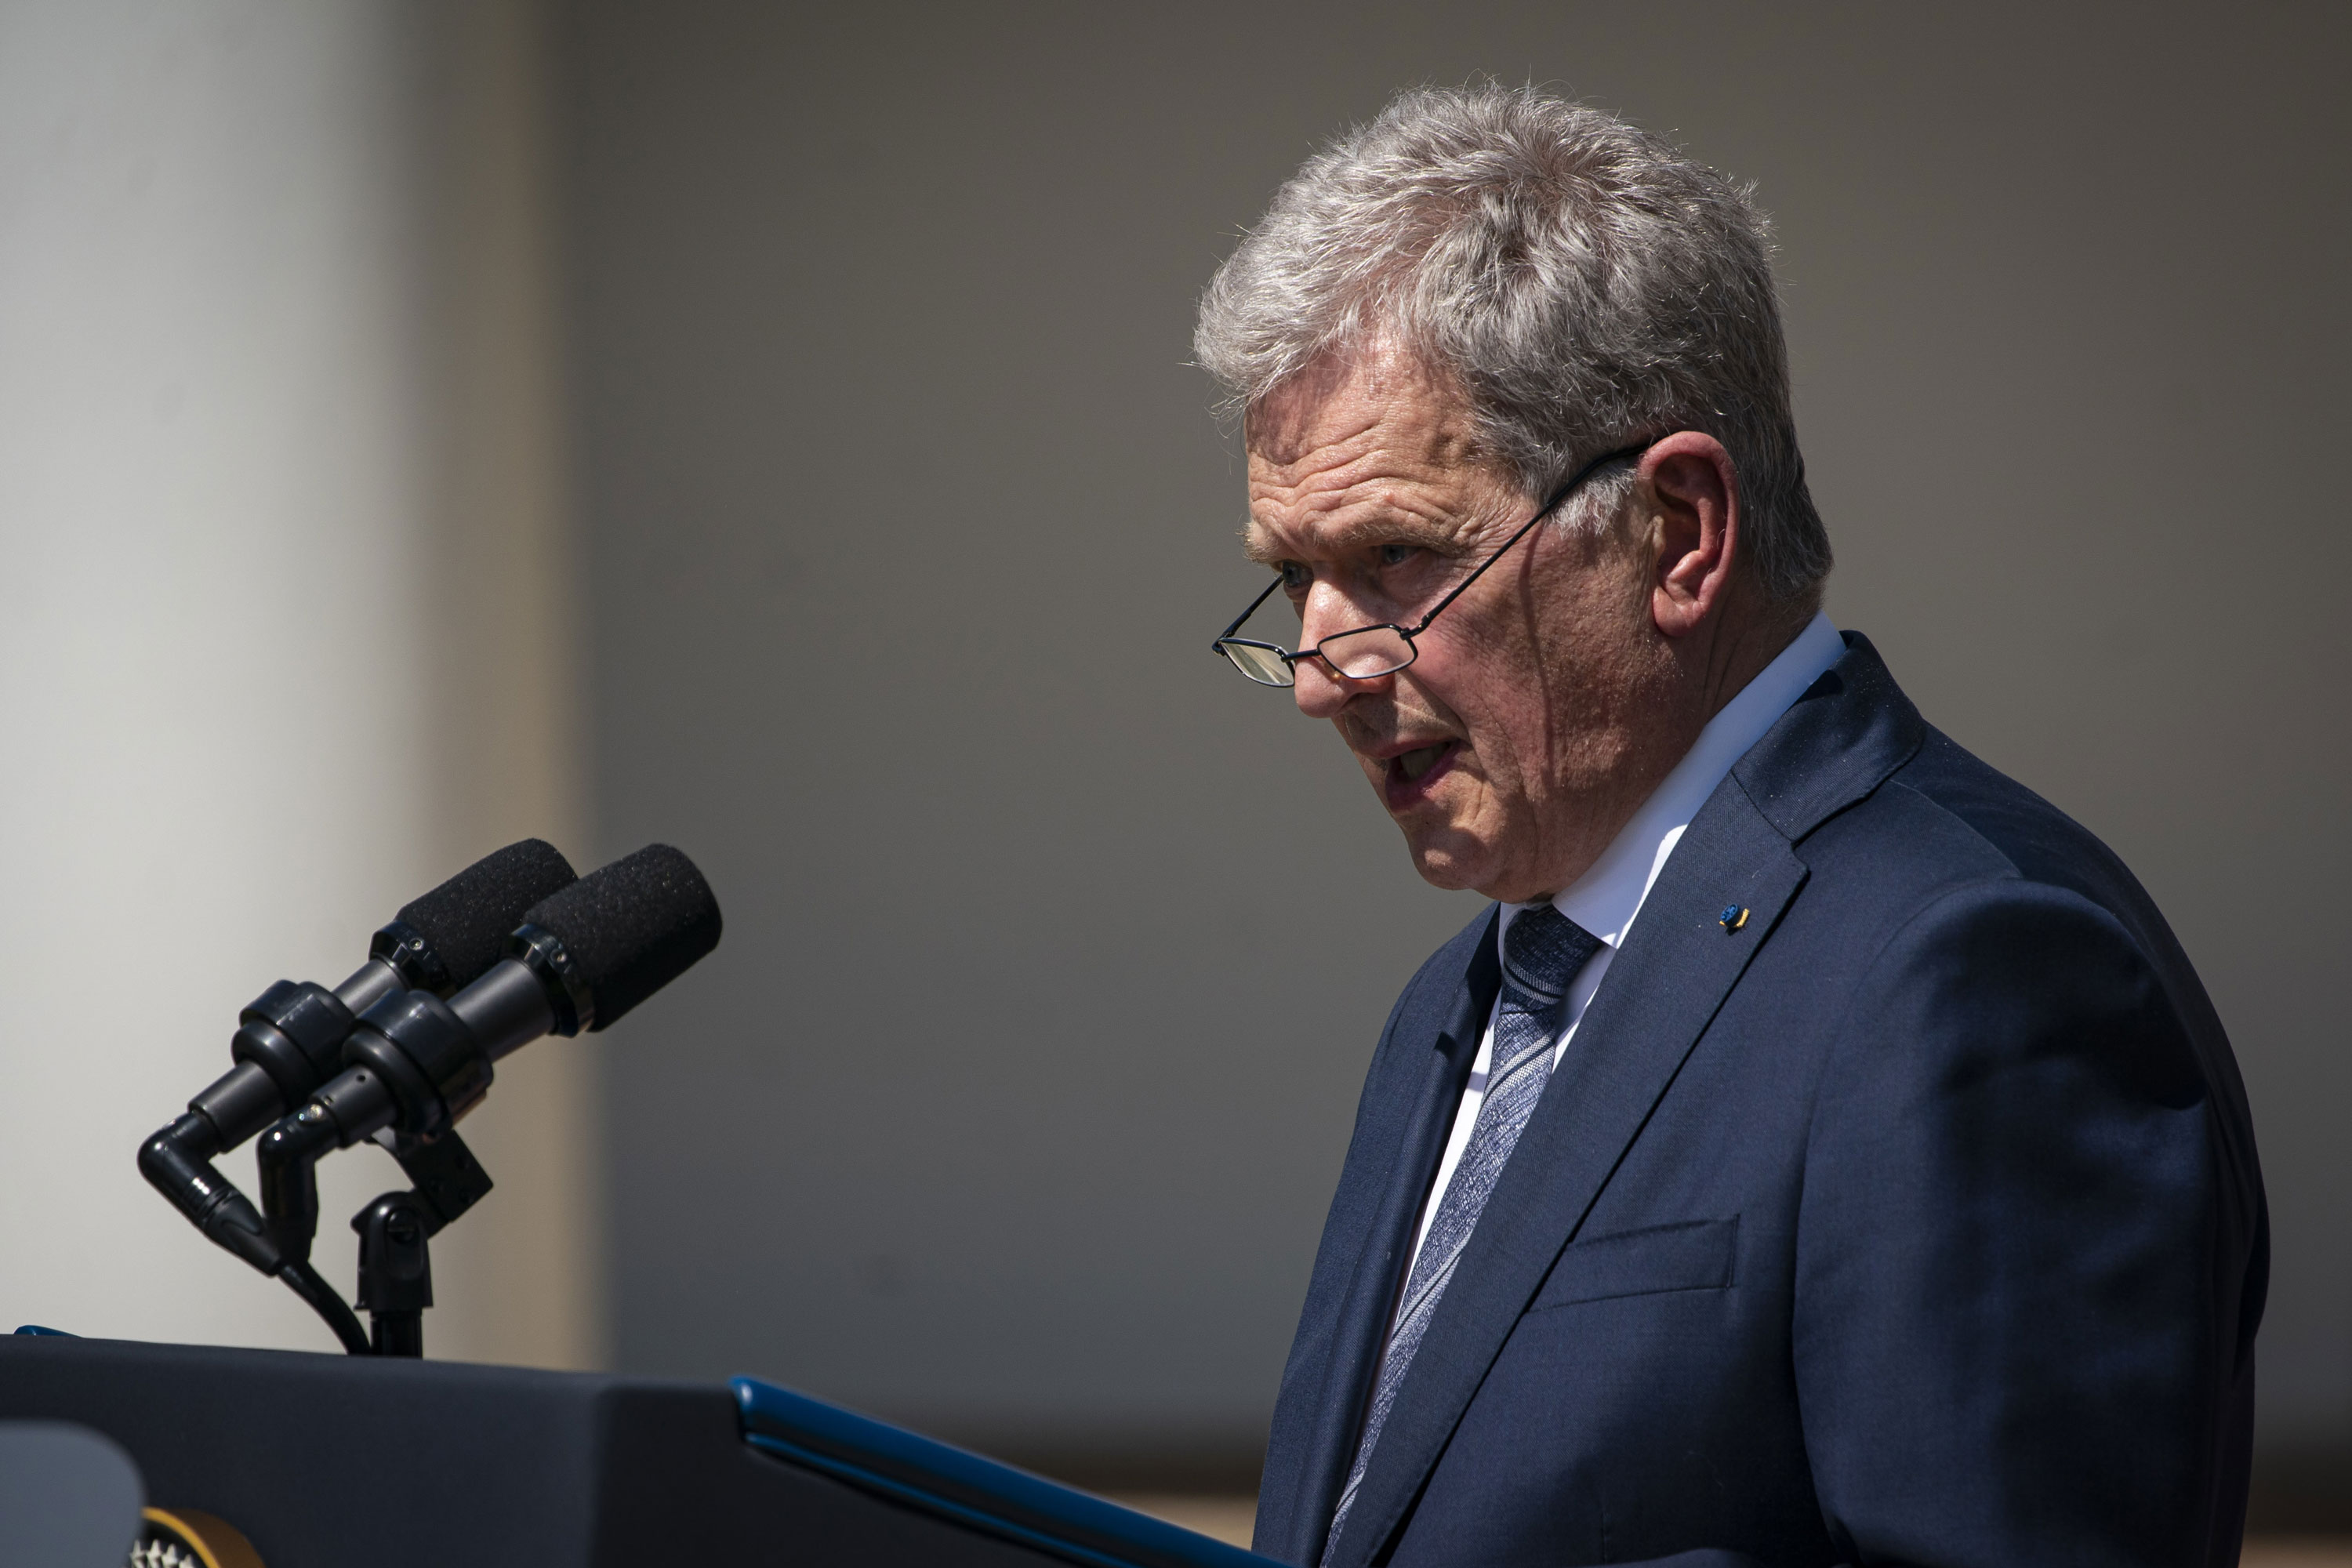 Sauli Niinistö, Finland's president, speaks during a news conference in Washington, DC, on May 19.